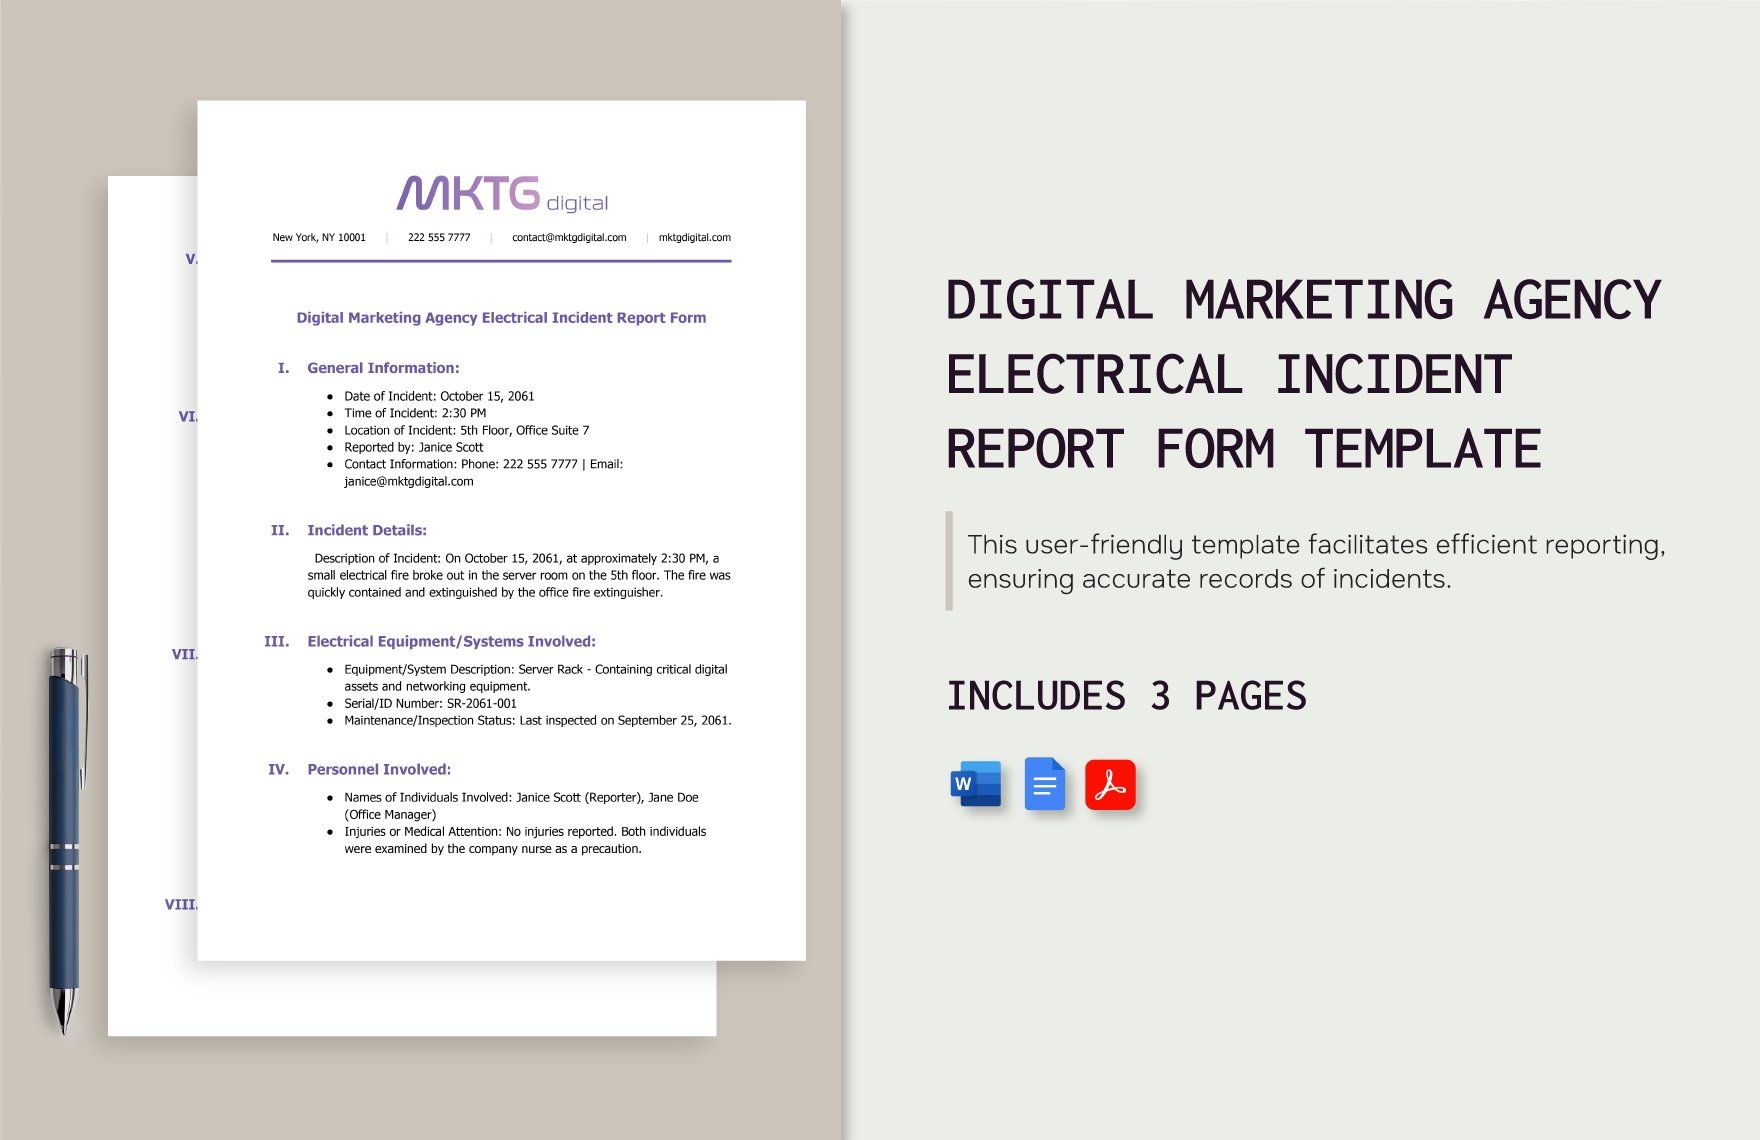 Digital Marketing Agency Electrical Incident Report Form Template